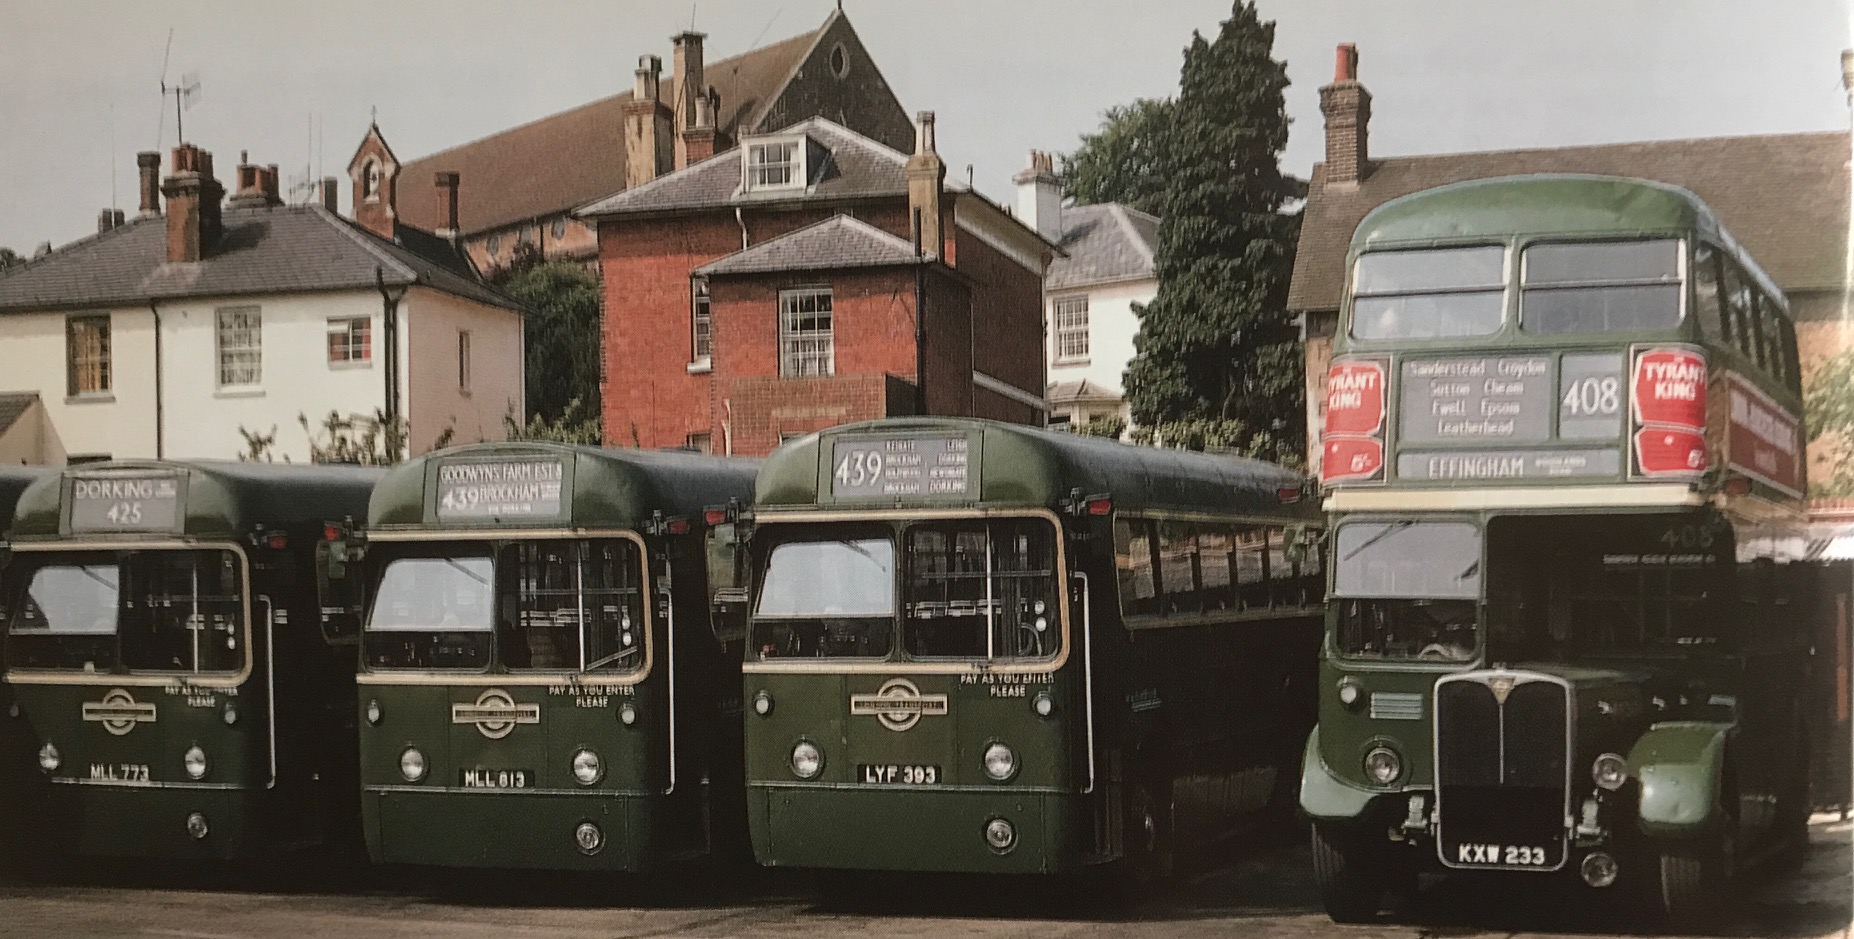 The Bench: Dorking Bus Garage 1969. 425 bus on the left.